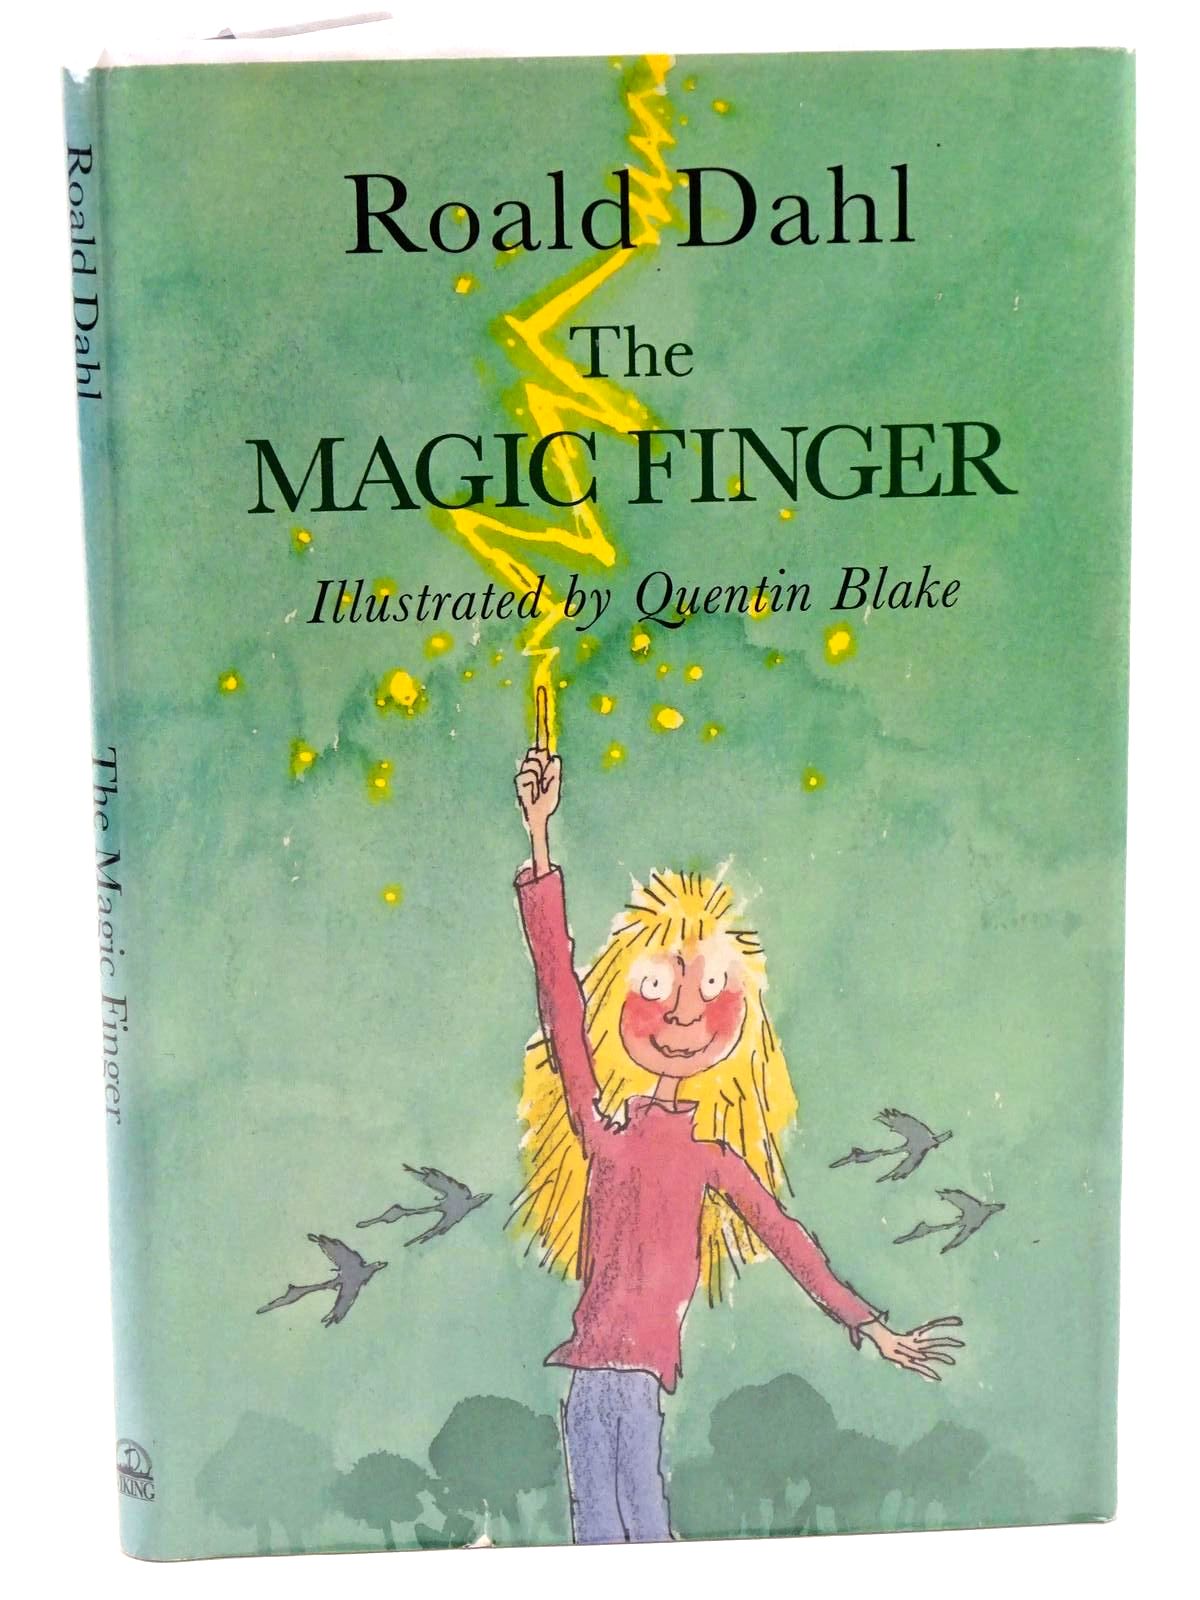 Photo of THE MAGIC FINGER written by Dahl, Roald illustrated by Blake, Quentin published by Viking (STOCK CODE: 1318122)  for sale by Stella & Rose's Books